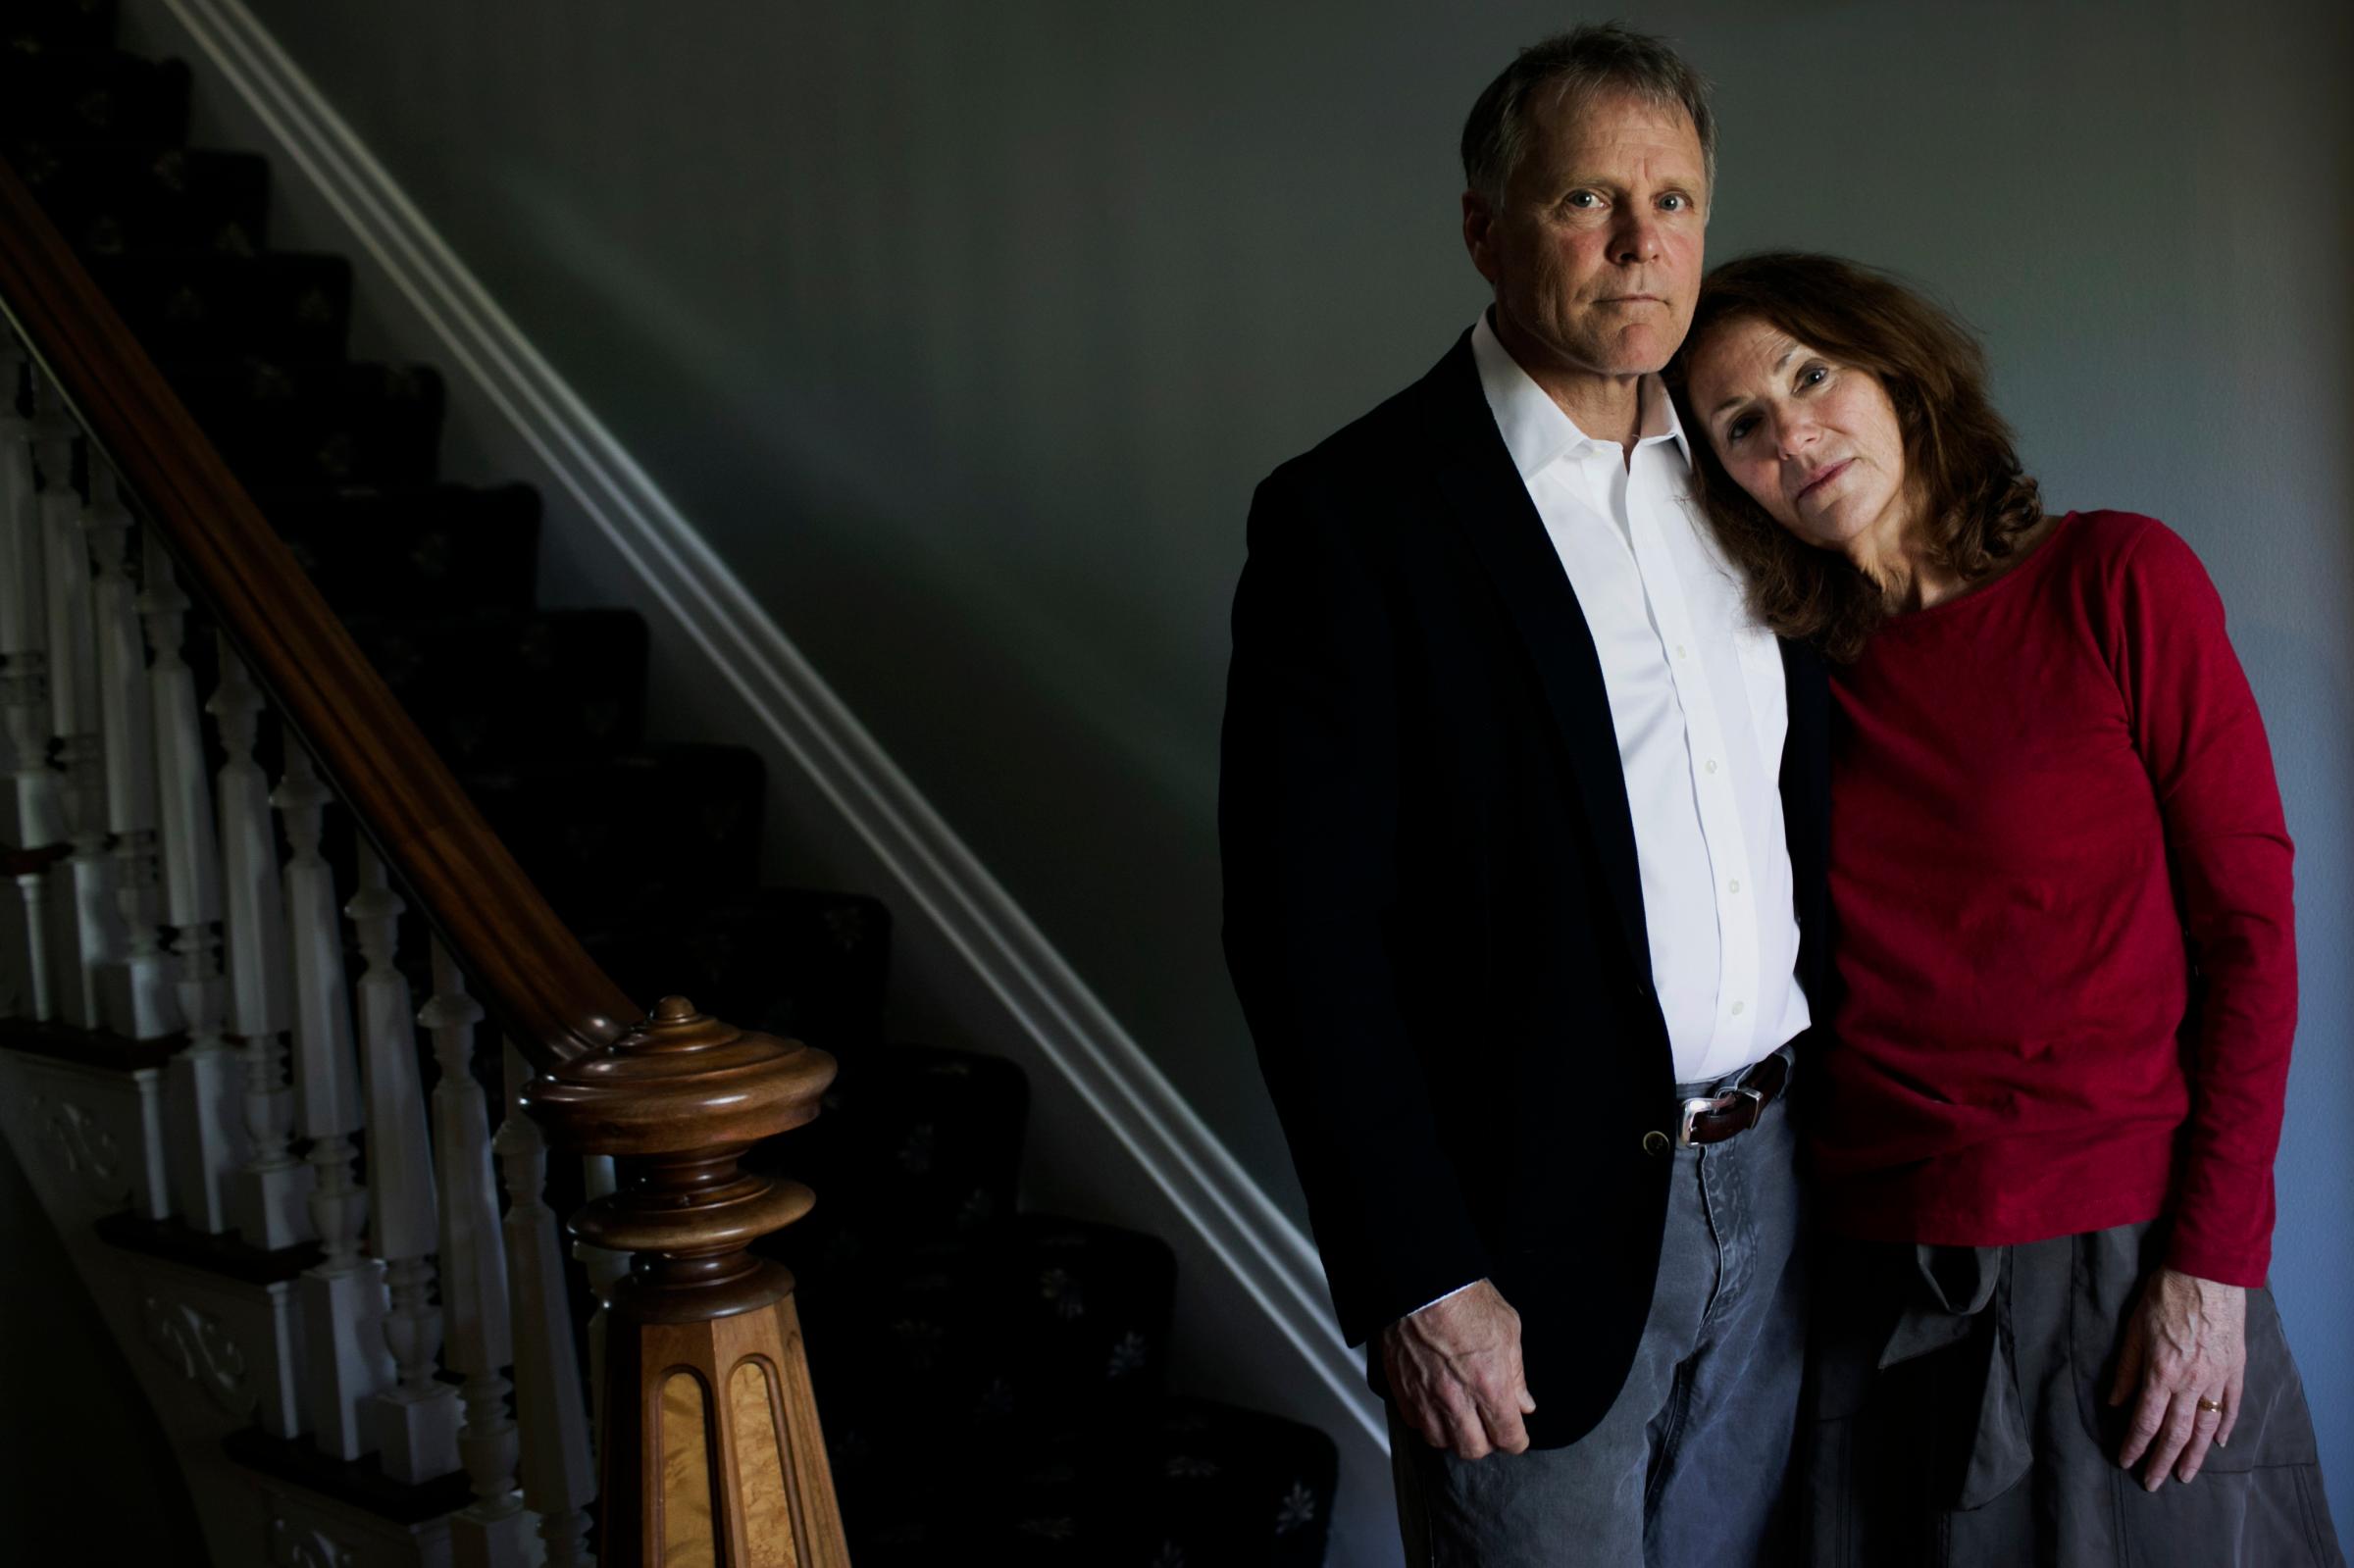 parents of Otto Warmbier